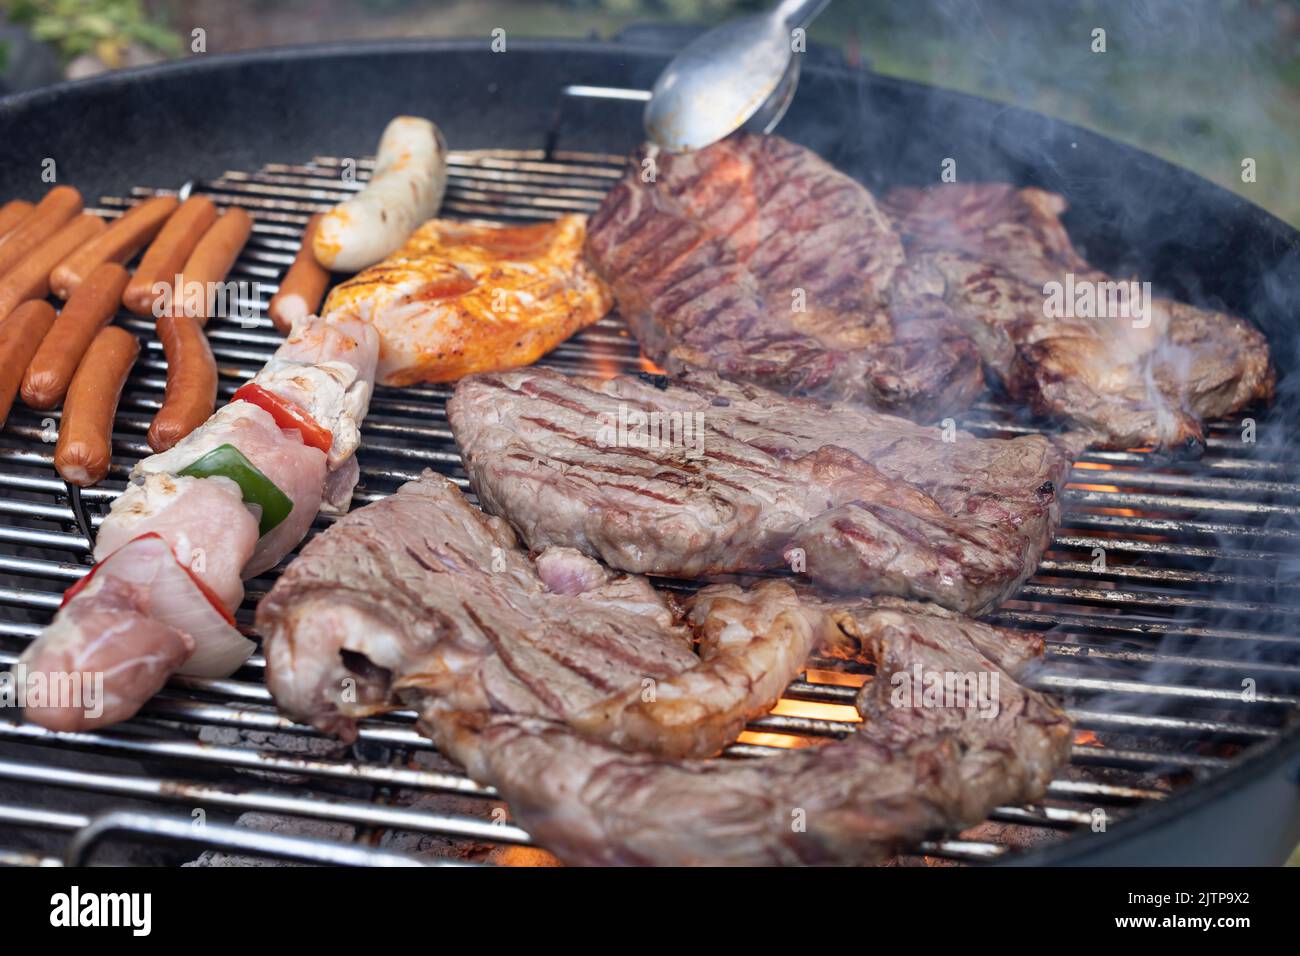 large beef steaks and sausages on charcoal grill Stock Photo